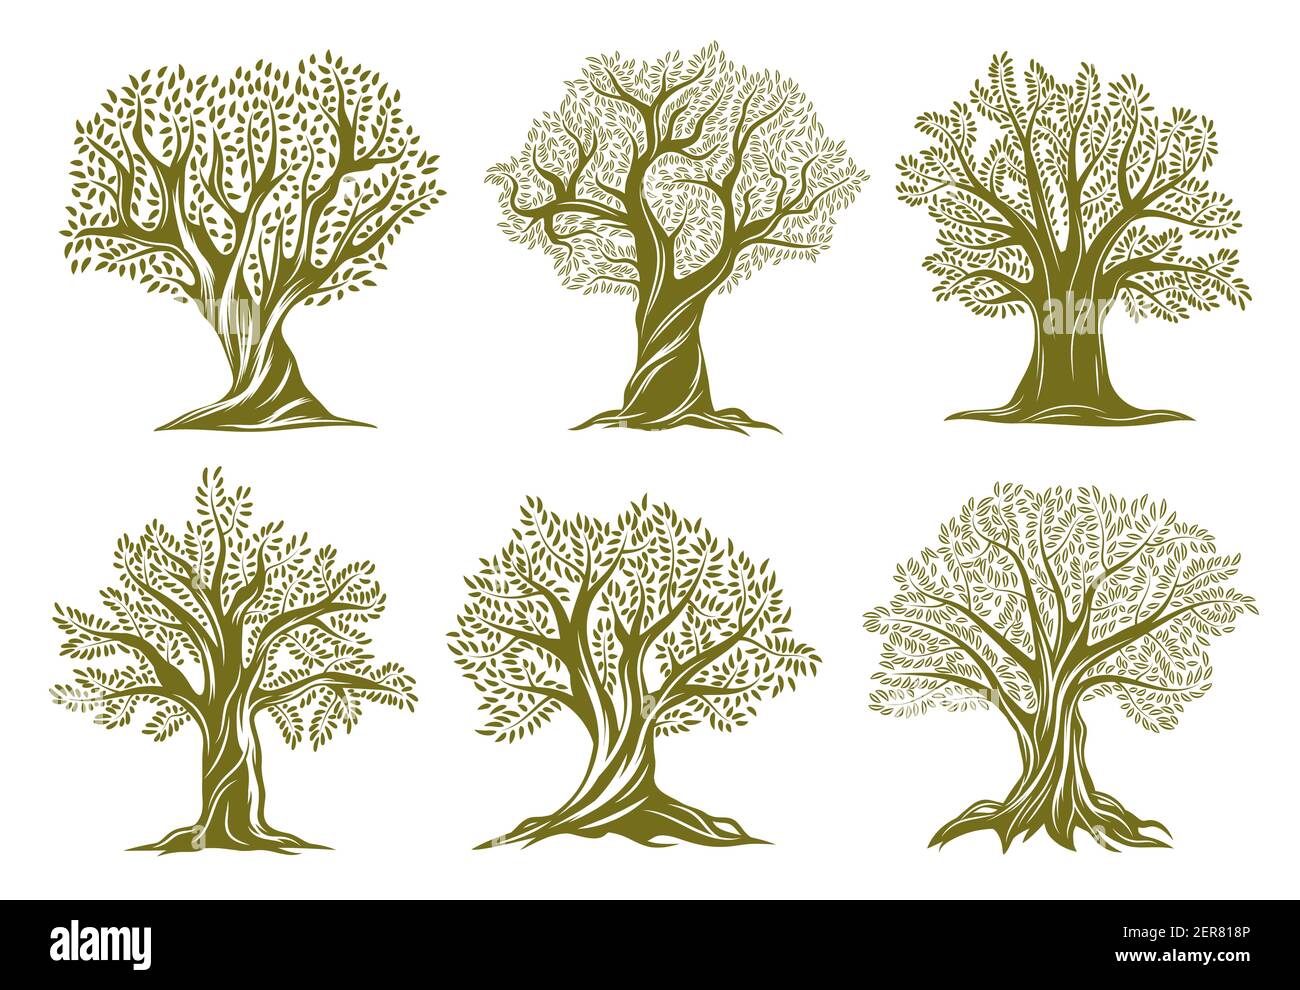 Old olive, willow or oak trees engraved icons. Trees with twisted trunk and branches, big crown, green foliage and exposed roots vector set. Garden, f Stock Vector